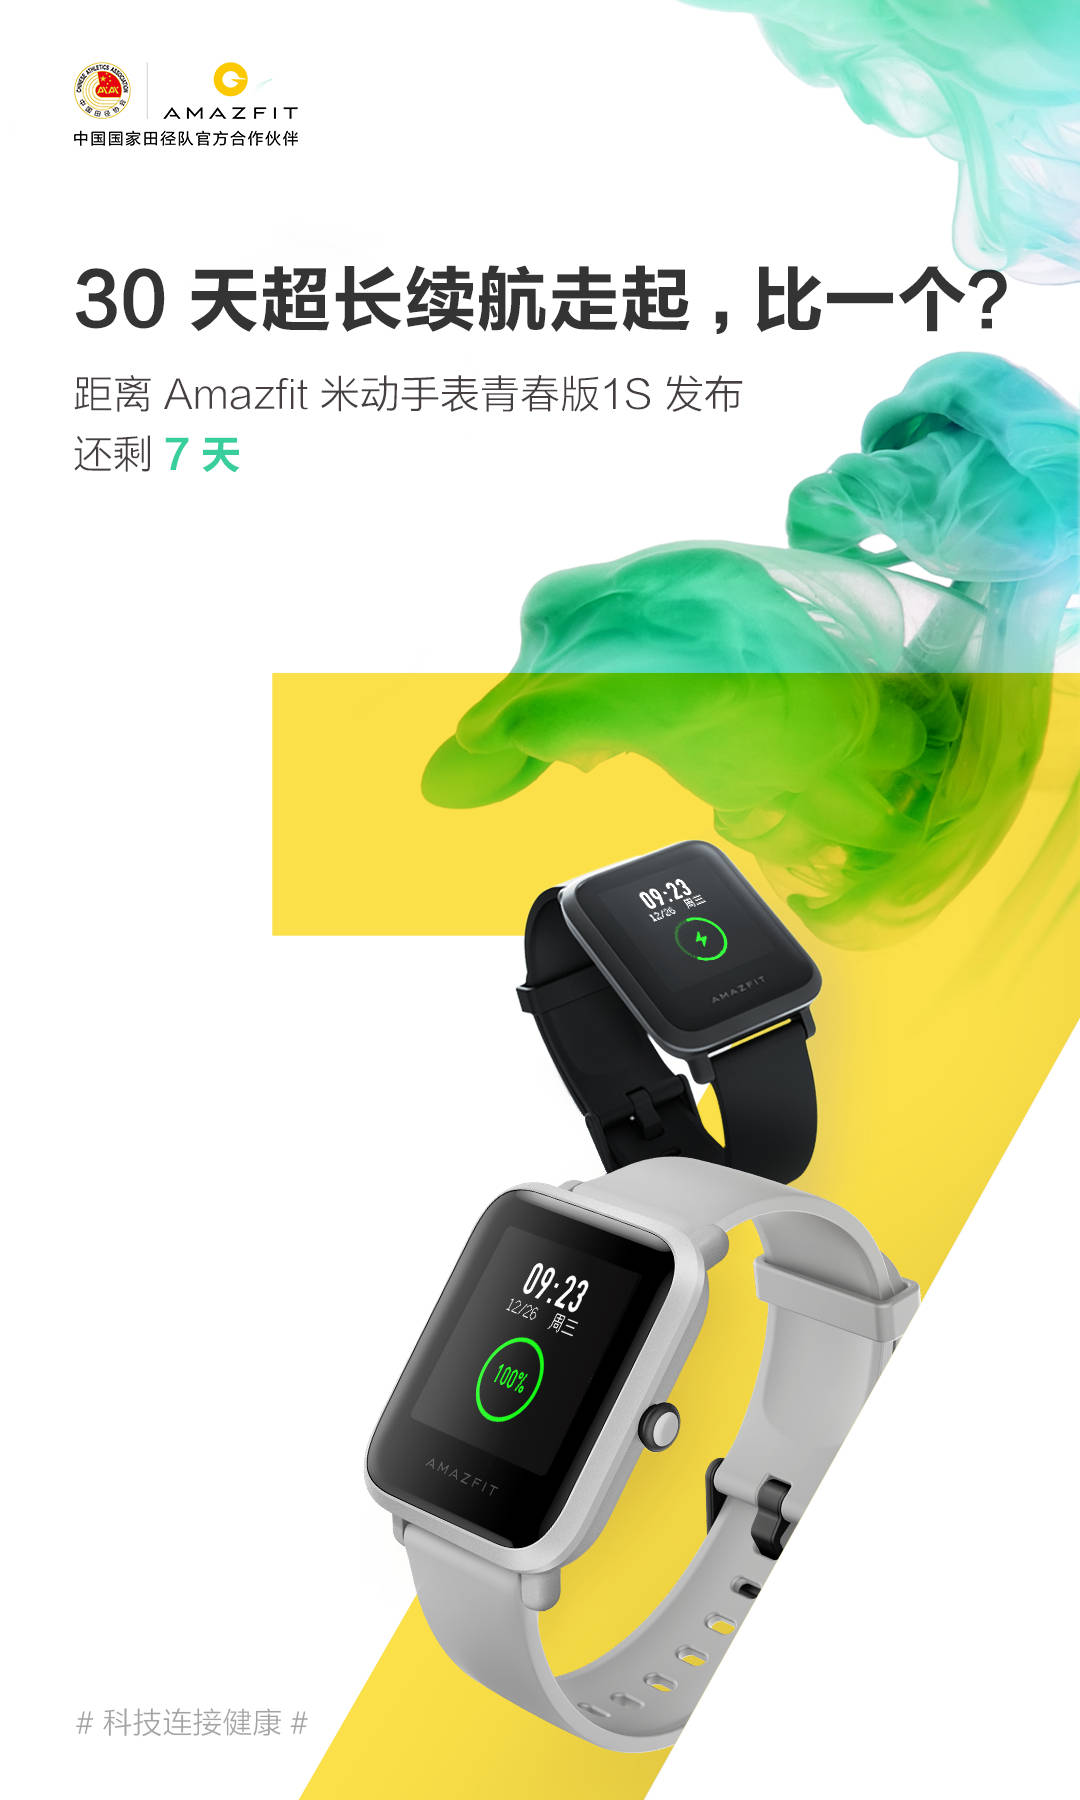 Amazfit Bip Lite 1S To Be Unveiled on April 30